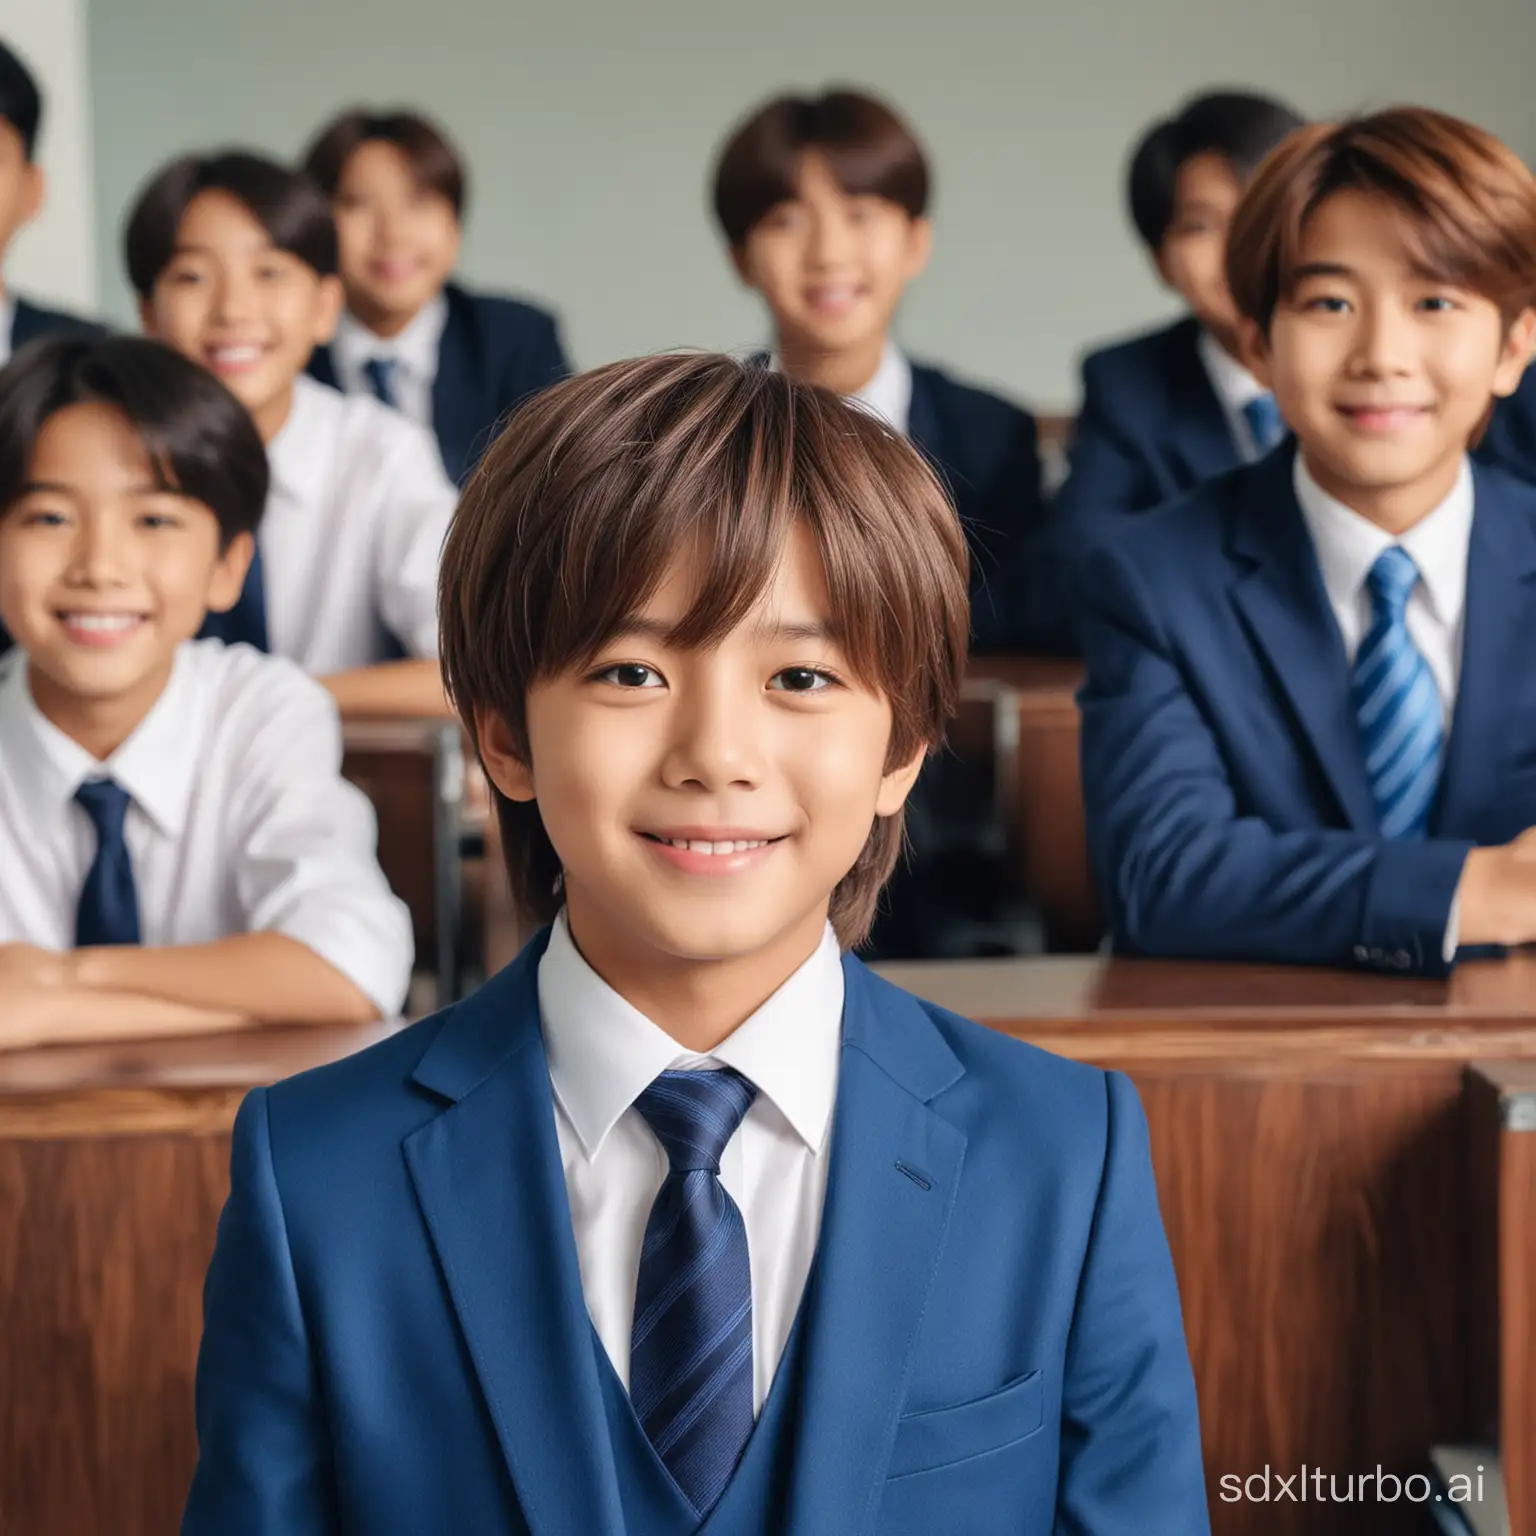 7 YEARS OLD BOY WITH BTS JIN face, BEAUTIFUL HAIR STYLE WITH BLUE SUIT AND TIE, center of frame, smile, smart, , whole head, both sides shoulders, suit are in the frame, he standing front class room, he face to all other whole class student